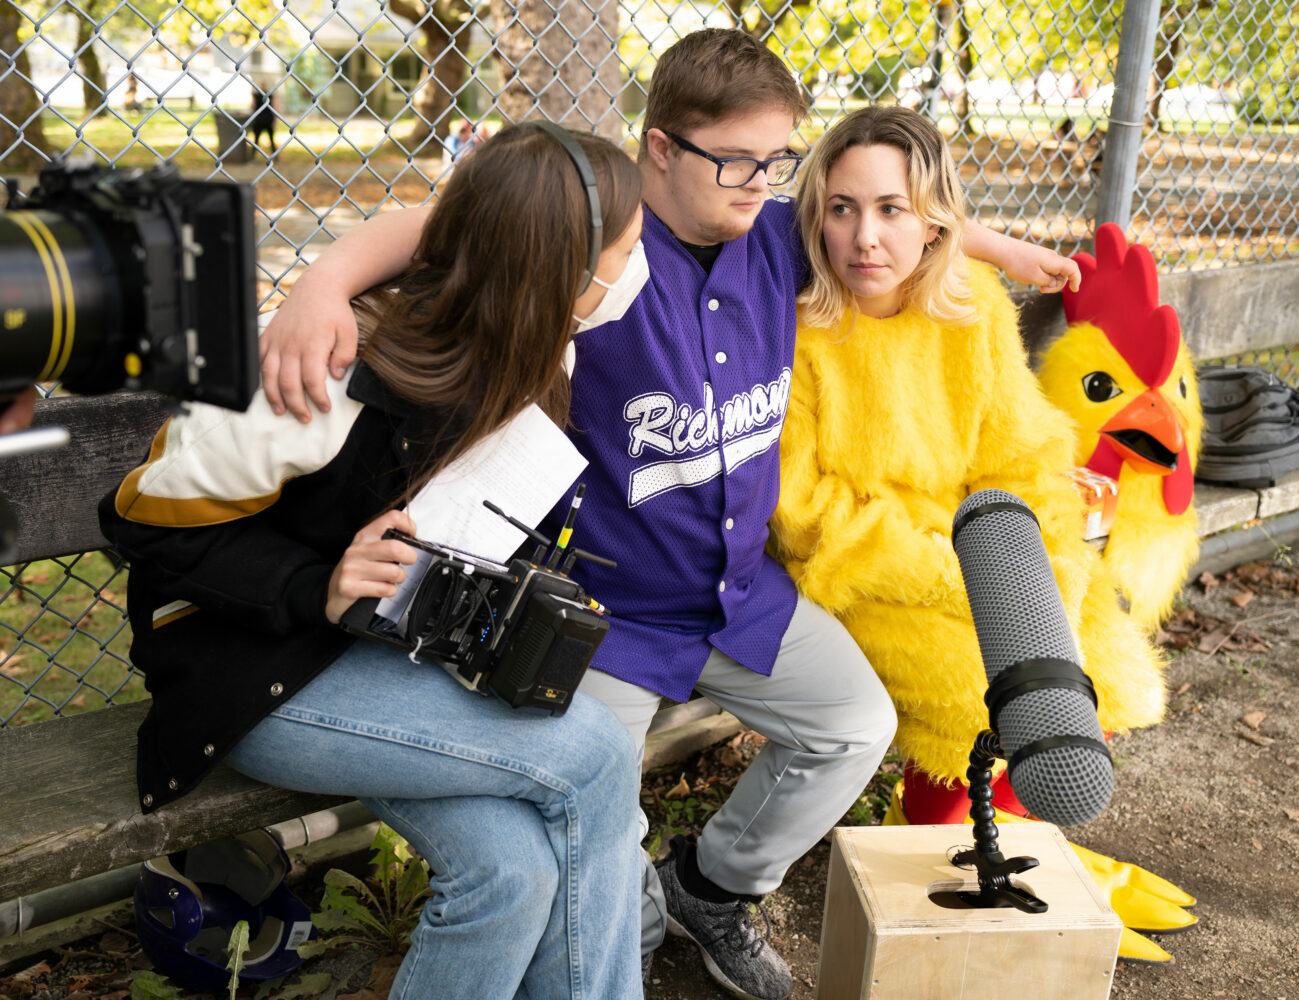 On a film set, young man with Down syndrome sits on bench wearing purple baseball jersey, with one arm around blonde woman in chicken costume and other arm around brown haired female film producer